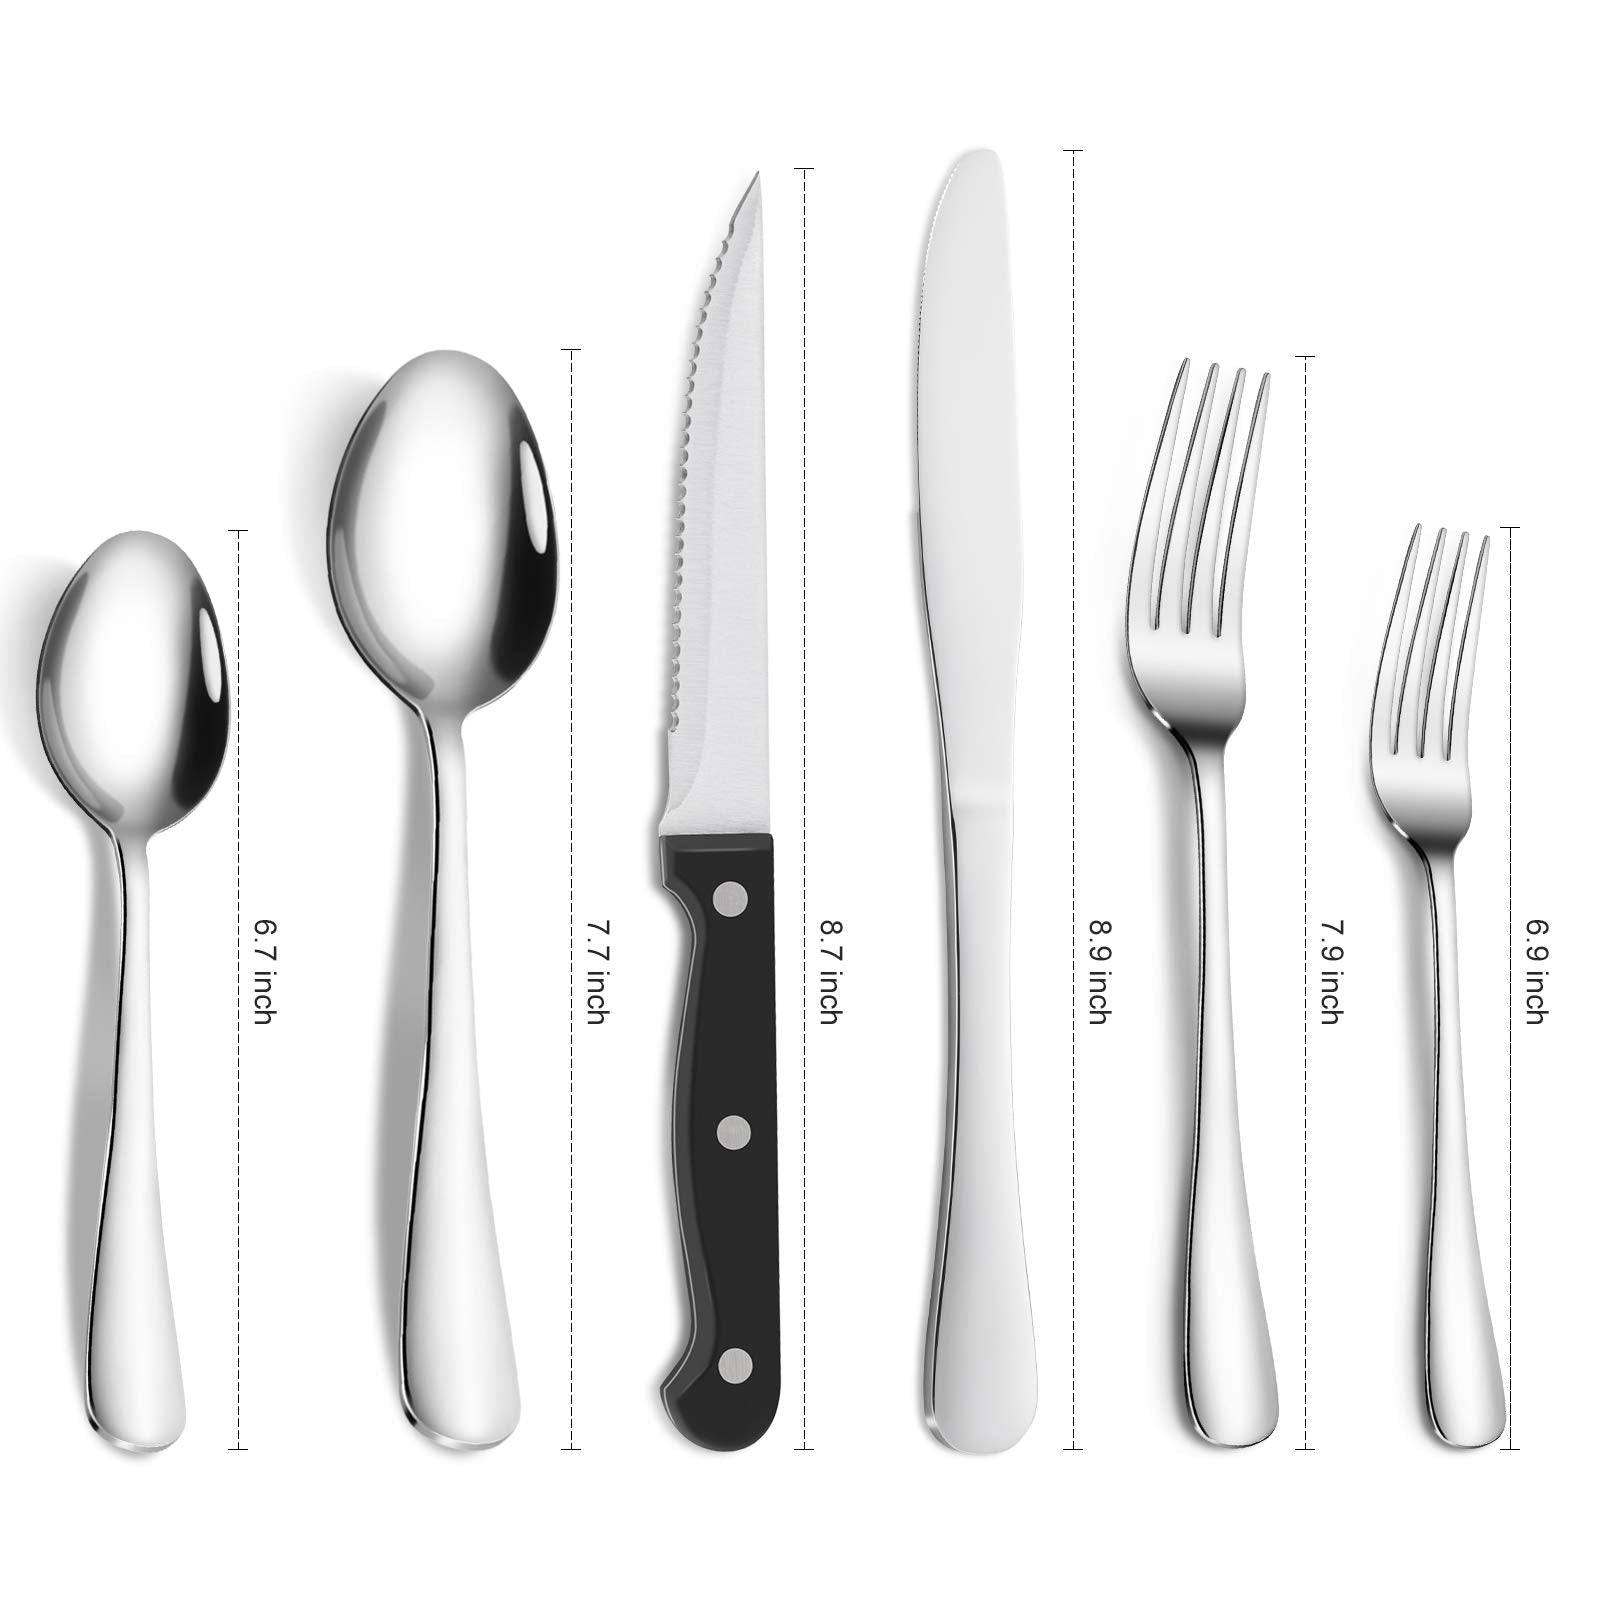 CIBEAT 36 Piece S592 Stainless Steel Silverware Set with Steak Knives